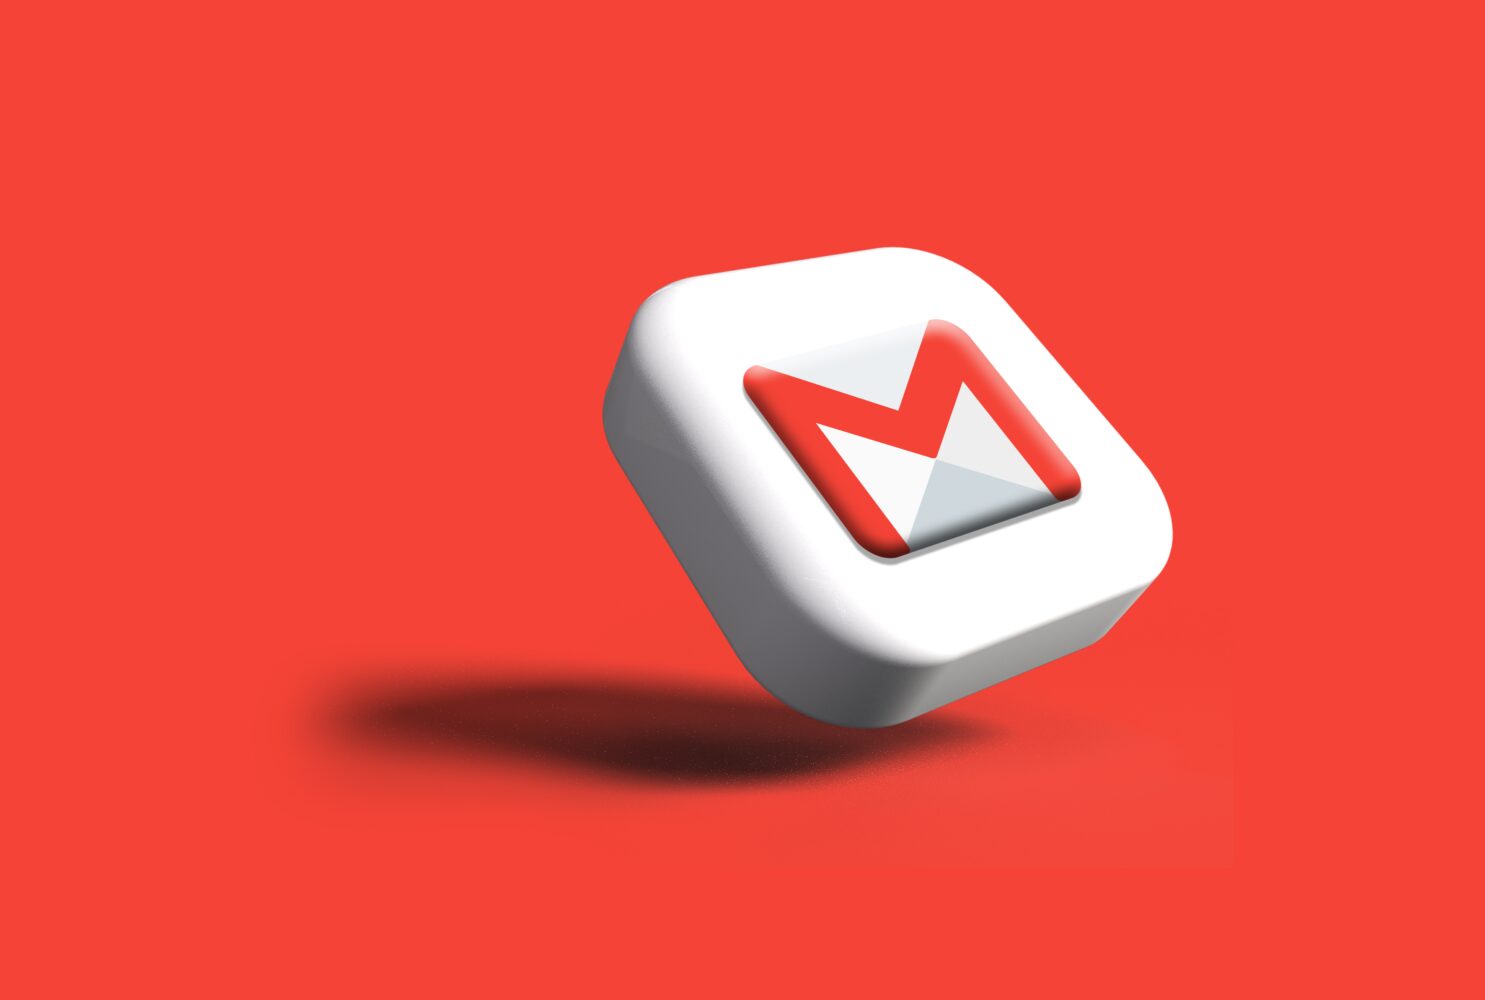 Transform Your Emails into Portable Documents: How to Save Emails as PDF in Gmail